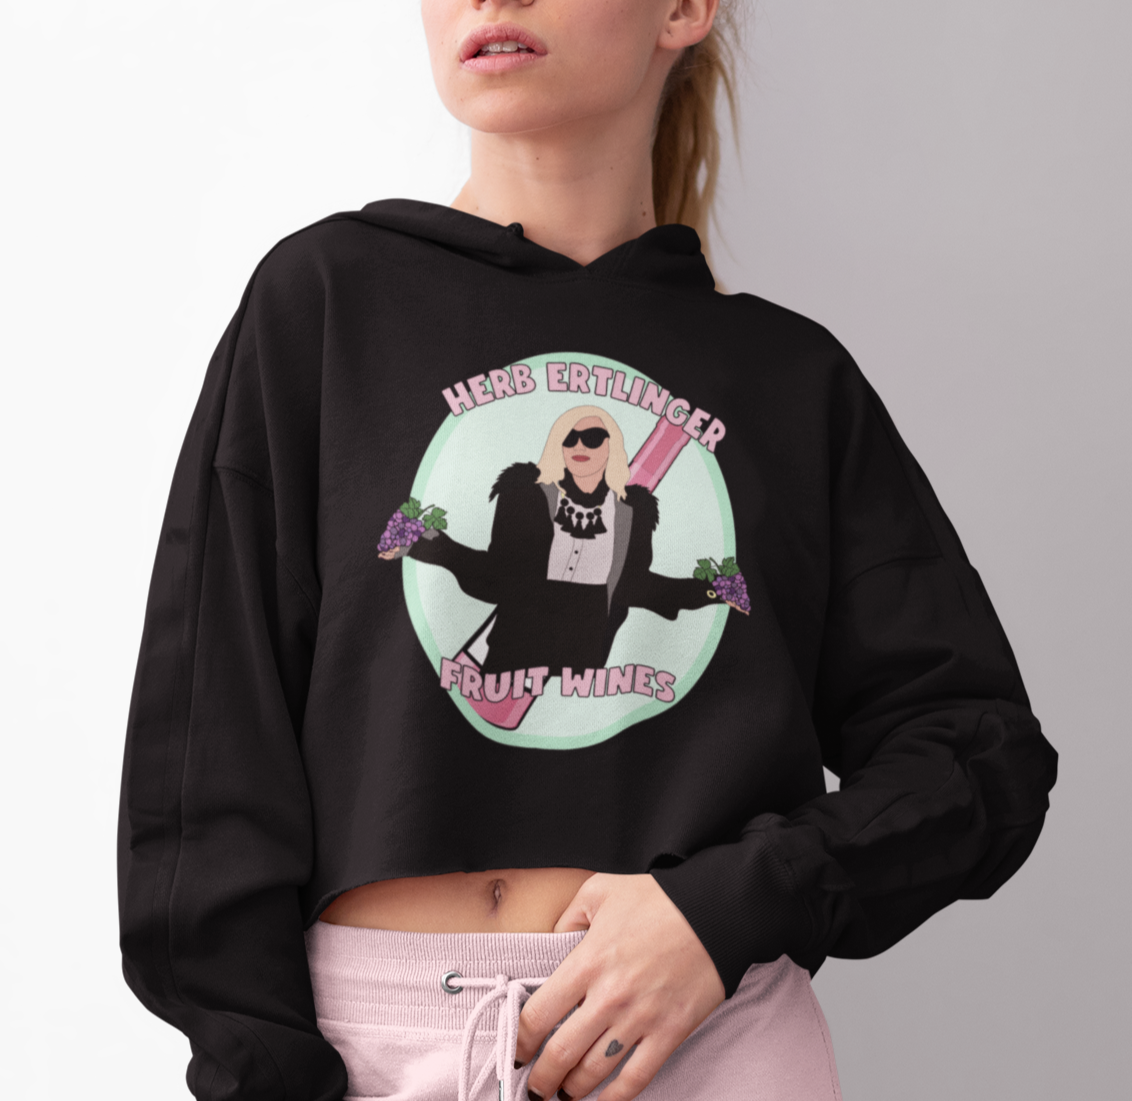 Black crop hoodie with moire rose and a bottle of wine saying herb ertlinger fruit wines - HighCiti